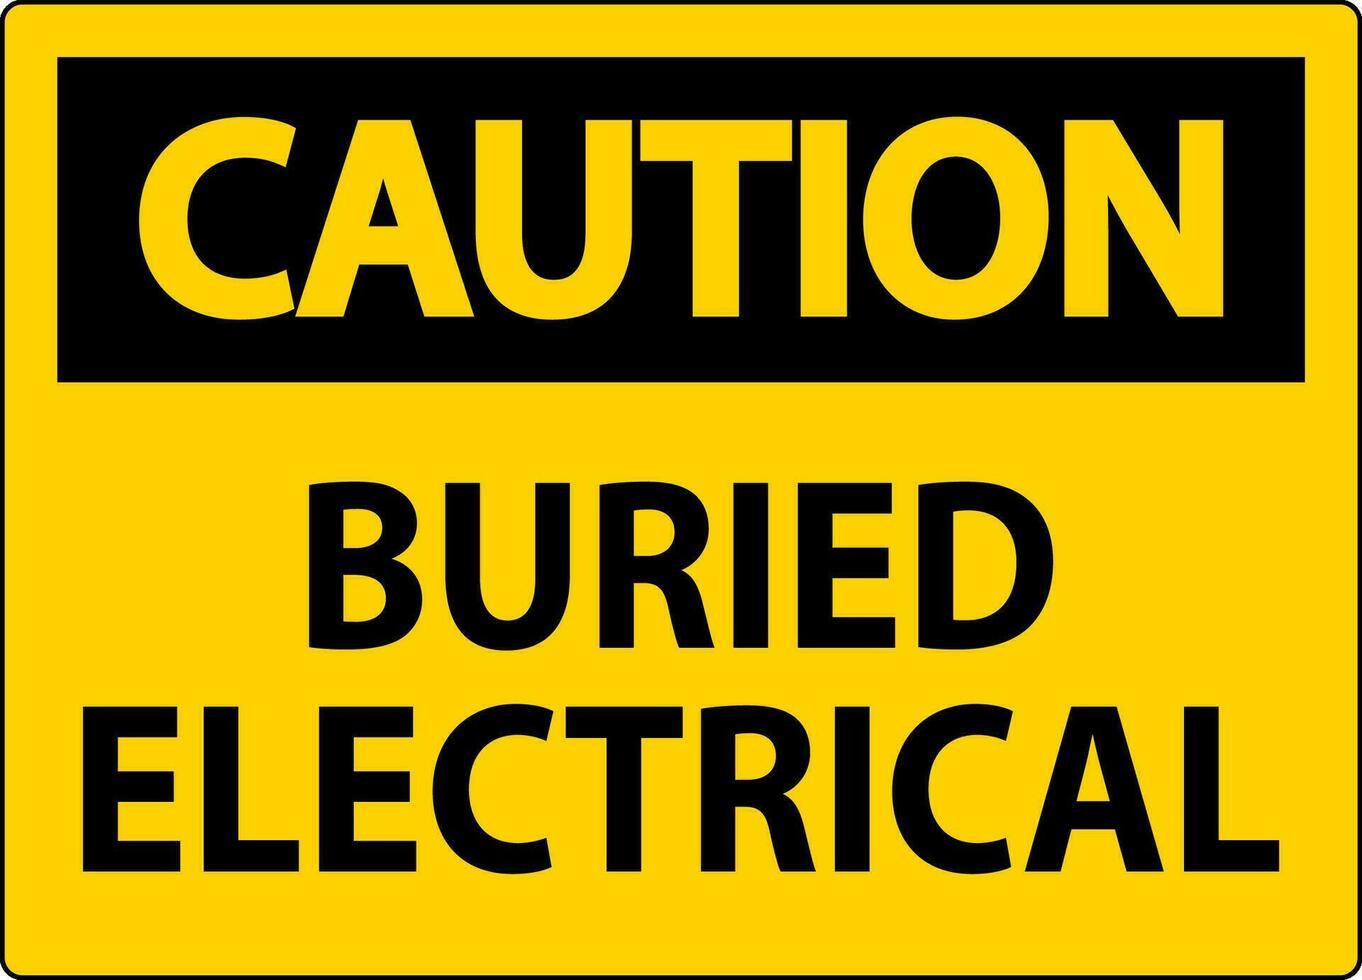 Caution Sign Buried Electrical On White Bacground vector